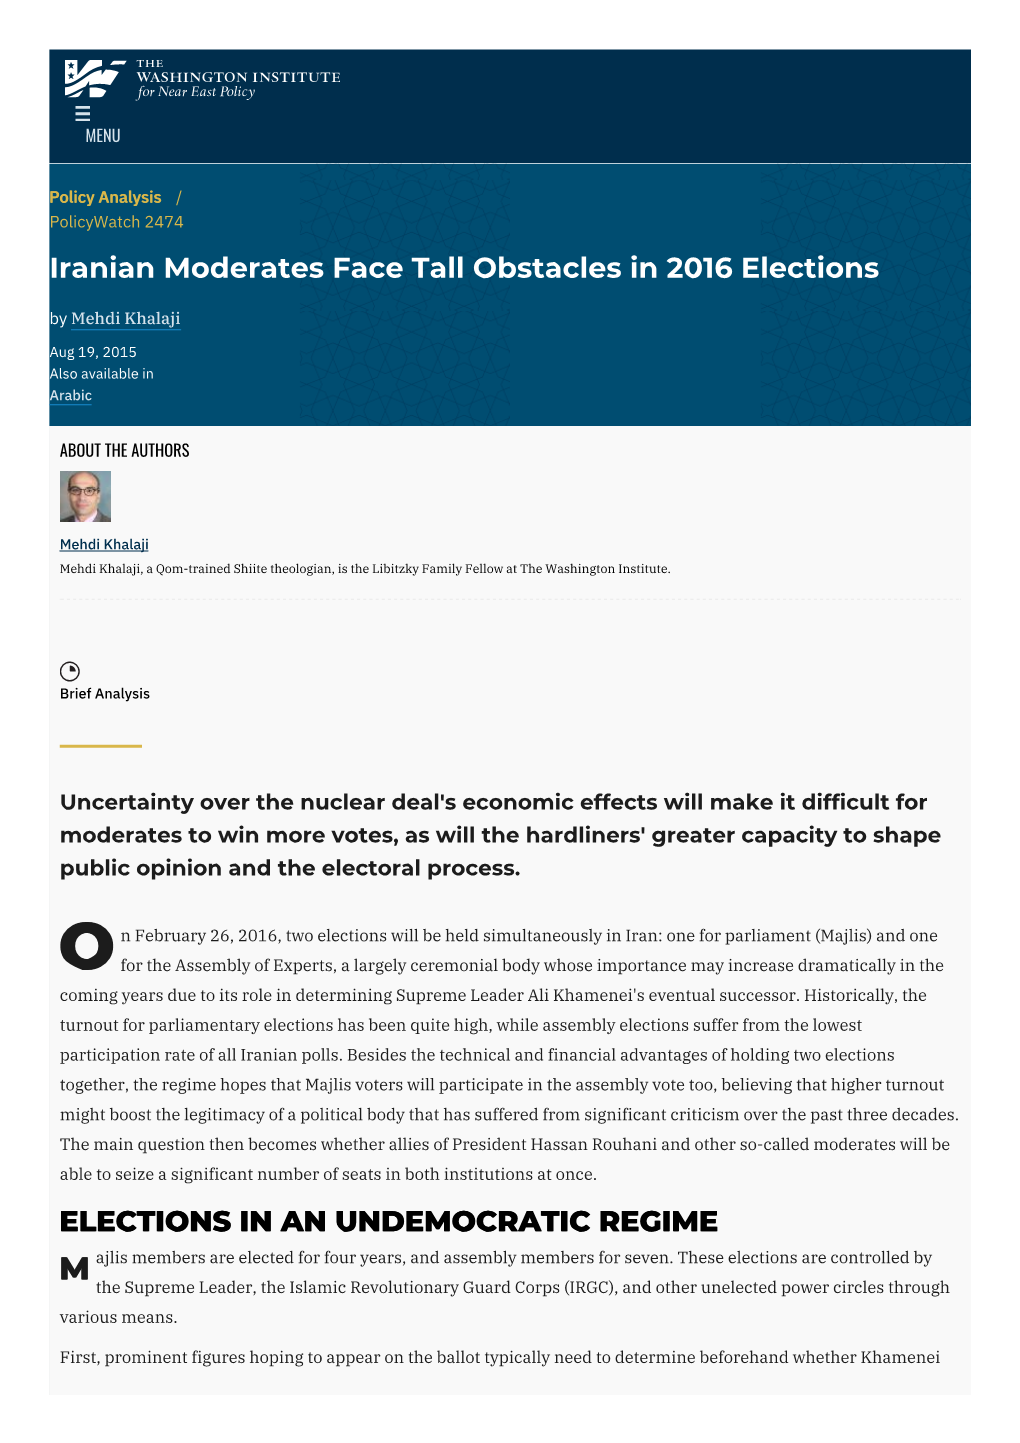 Iranian Moderates Face Tall Obstacles in 2016 Elections by Mehdi Khalaji